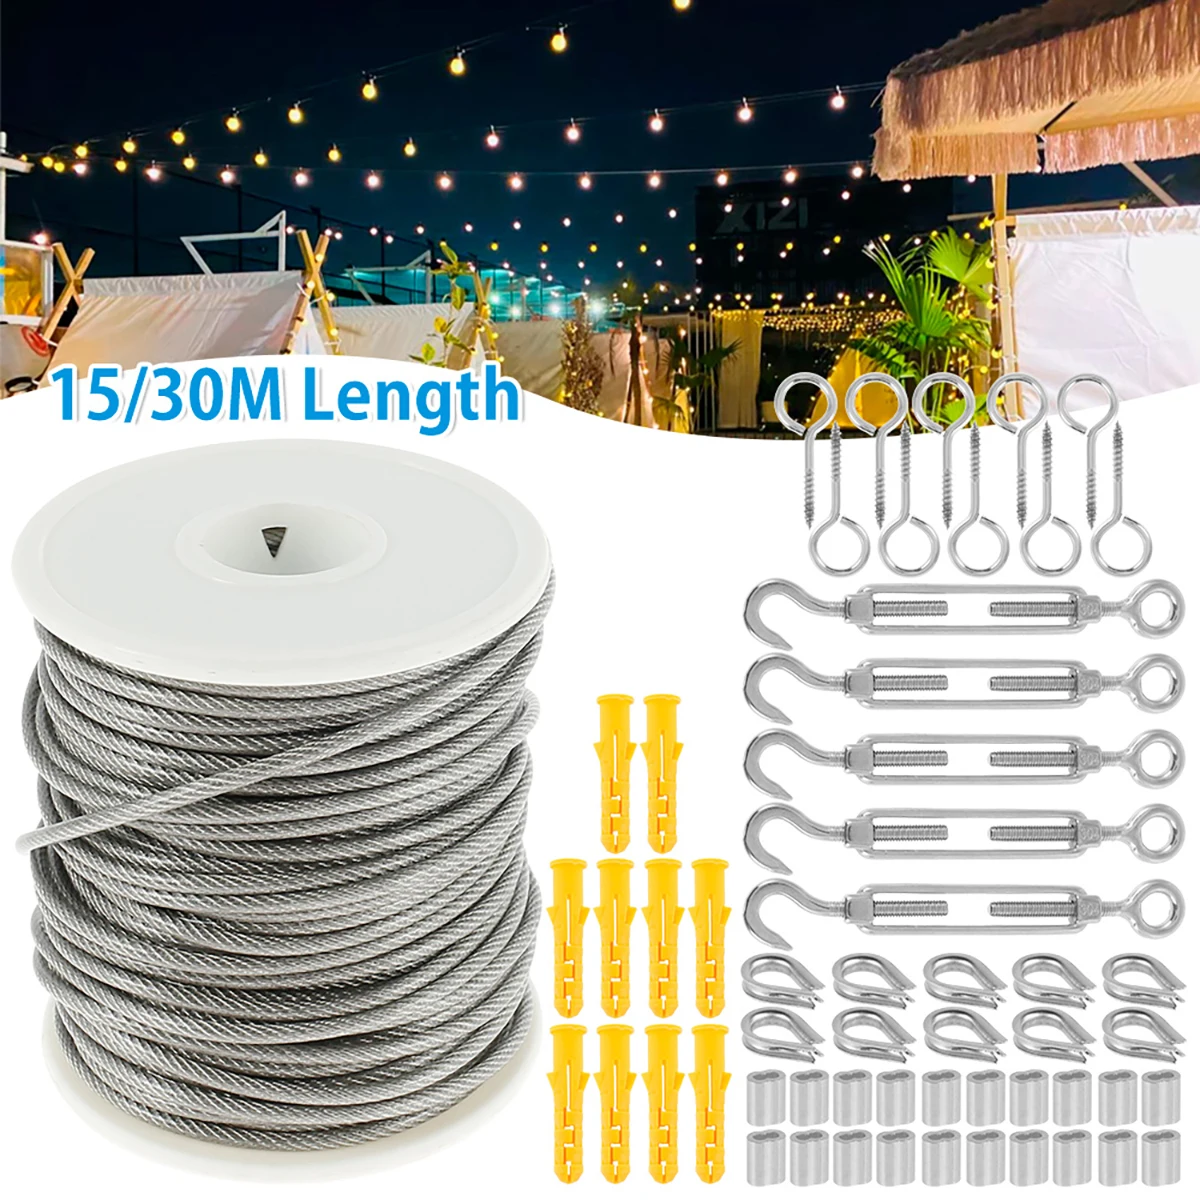 15M/30M Stainless Steel Heavy Duty Cable Rope Garden Wire Cable